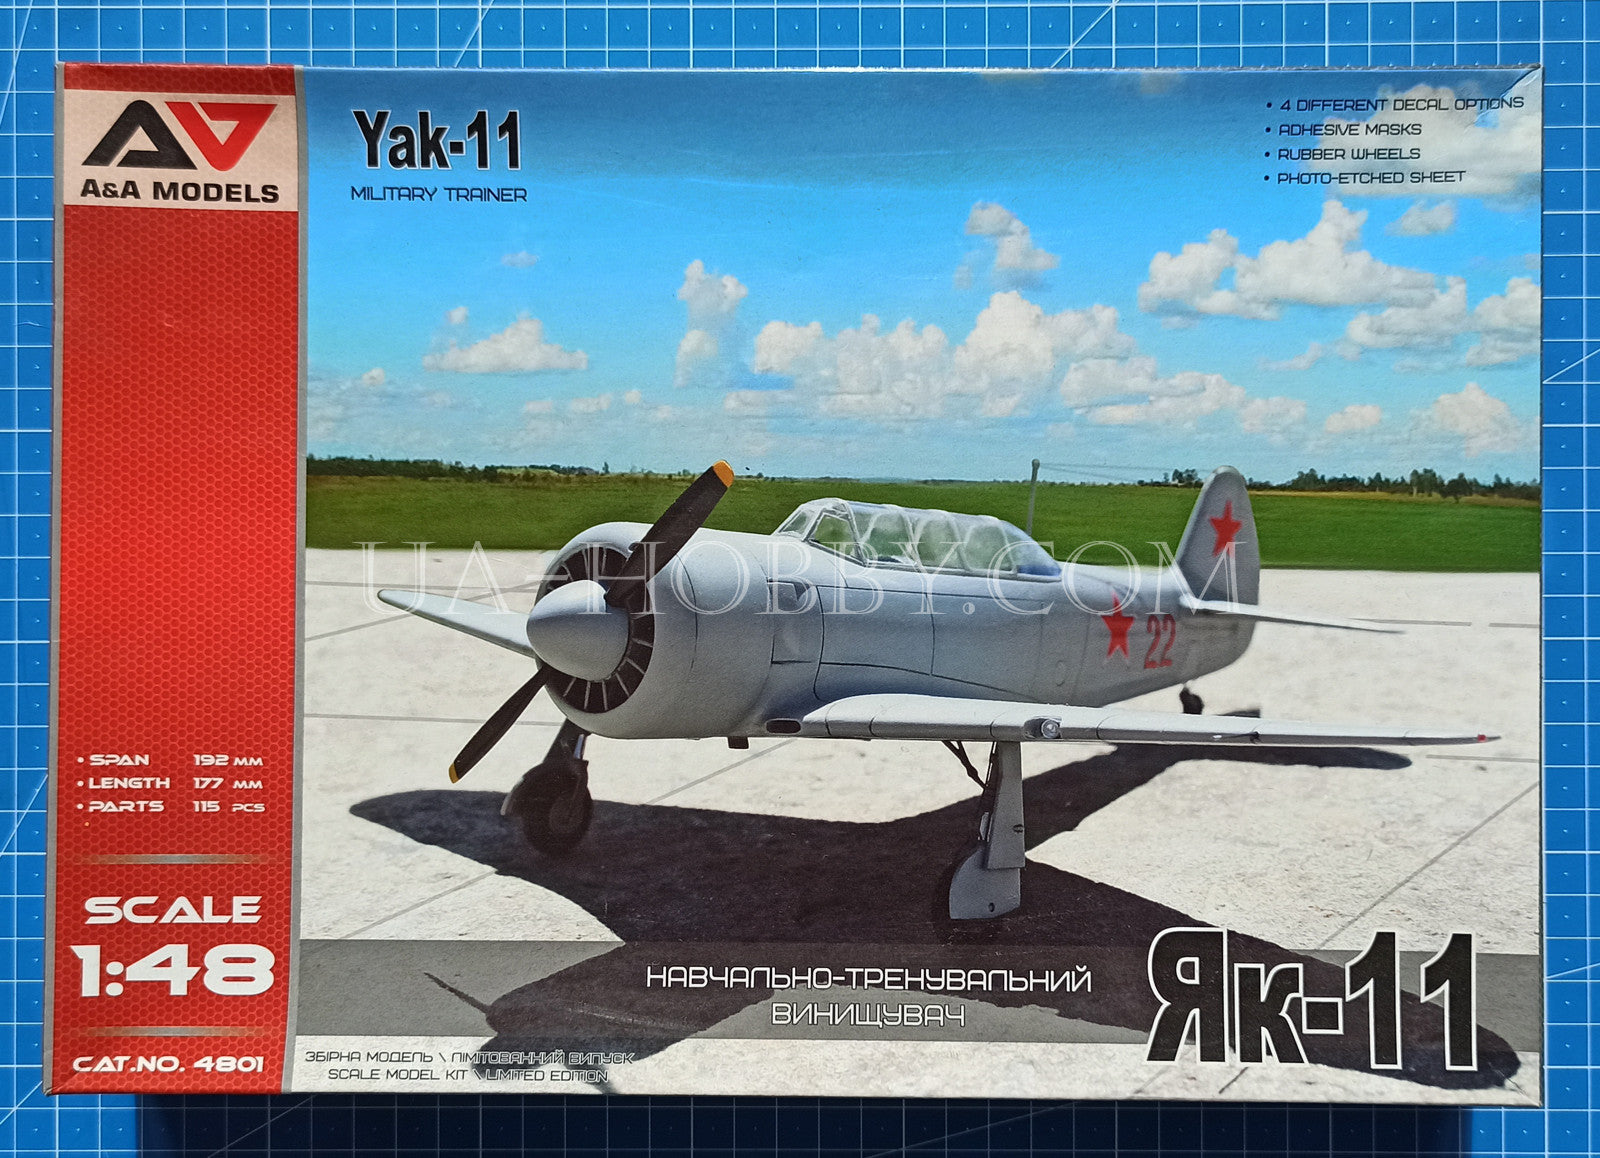 1/48 Yakovlev Yak-11 Military Trainer. A&A Models 4801